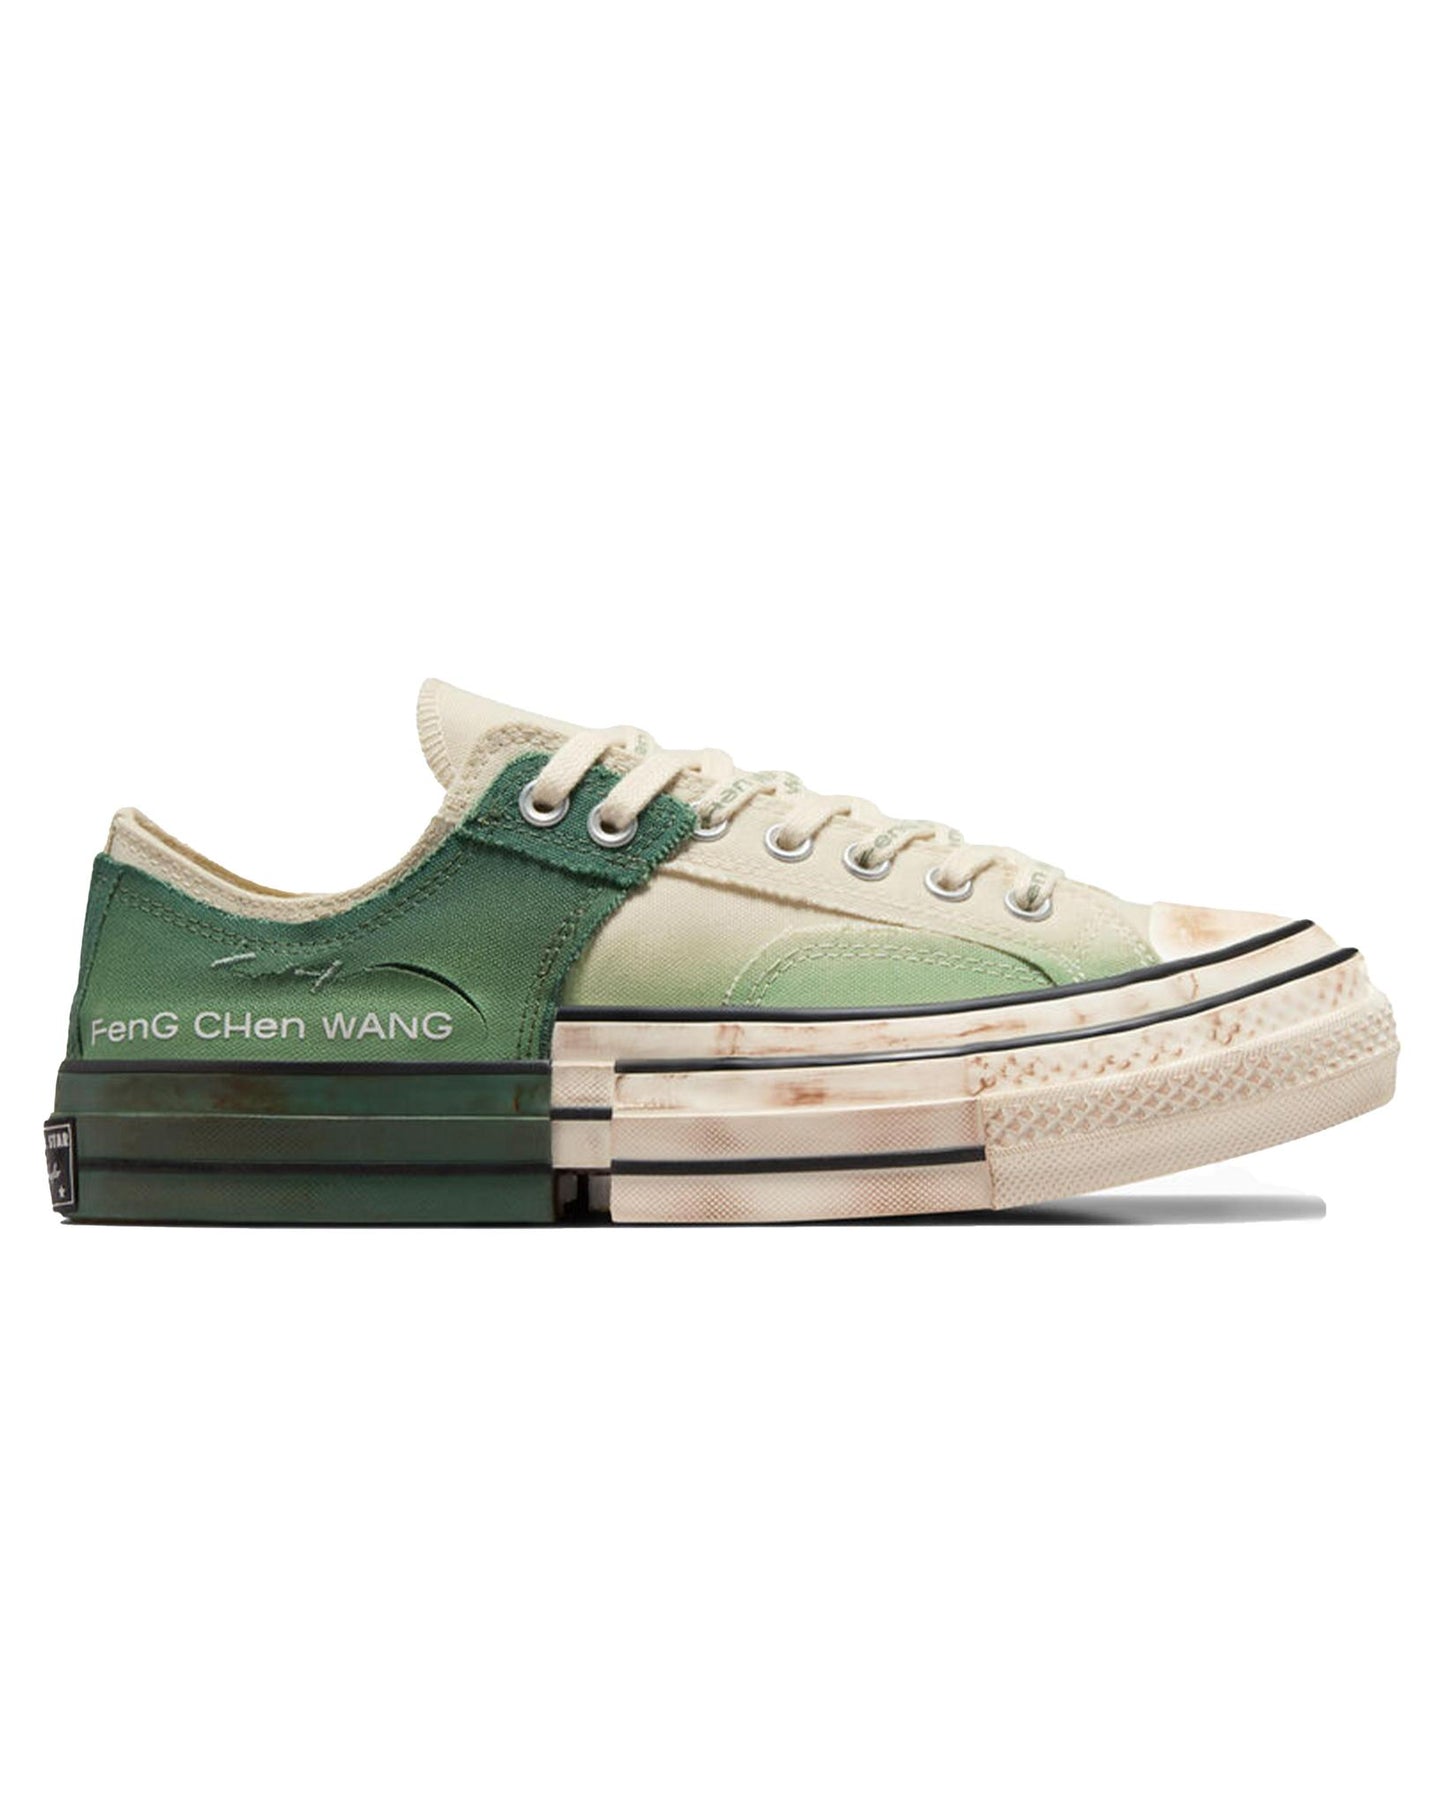 
                    
                      Converse x Feng Chen Wang 2 in 1 Chuck 70 Natural Ivory/Myrtle/Egret
                    
                  